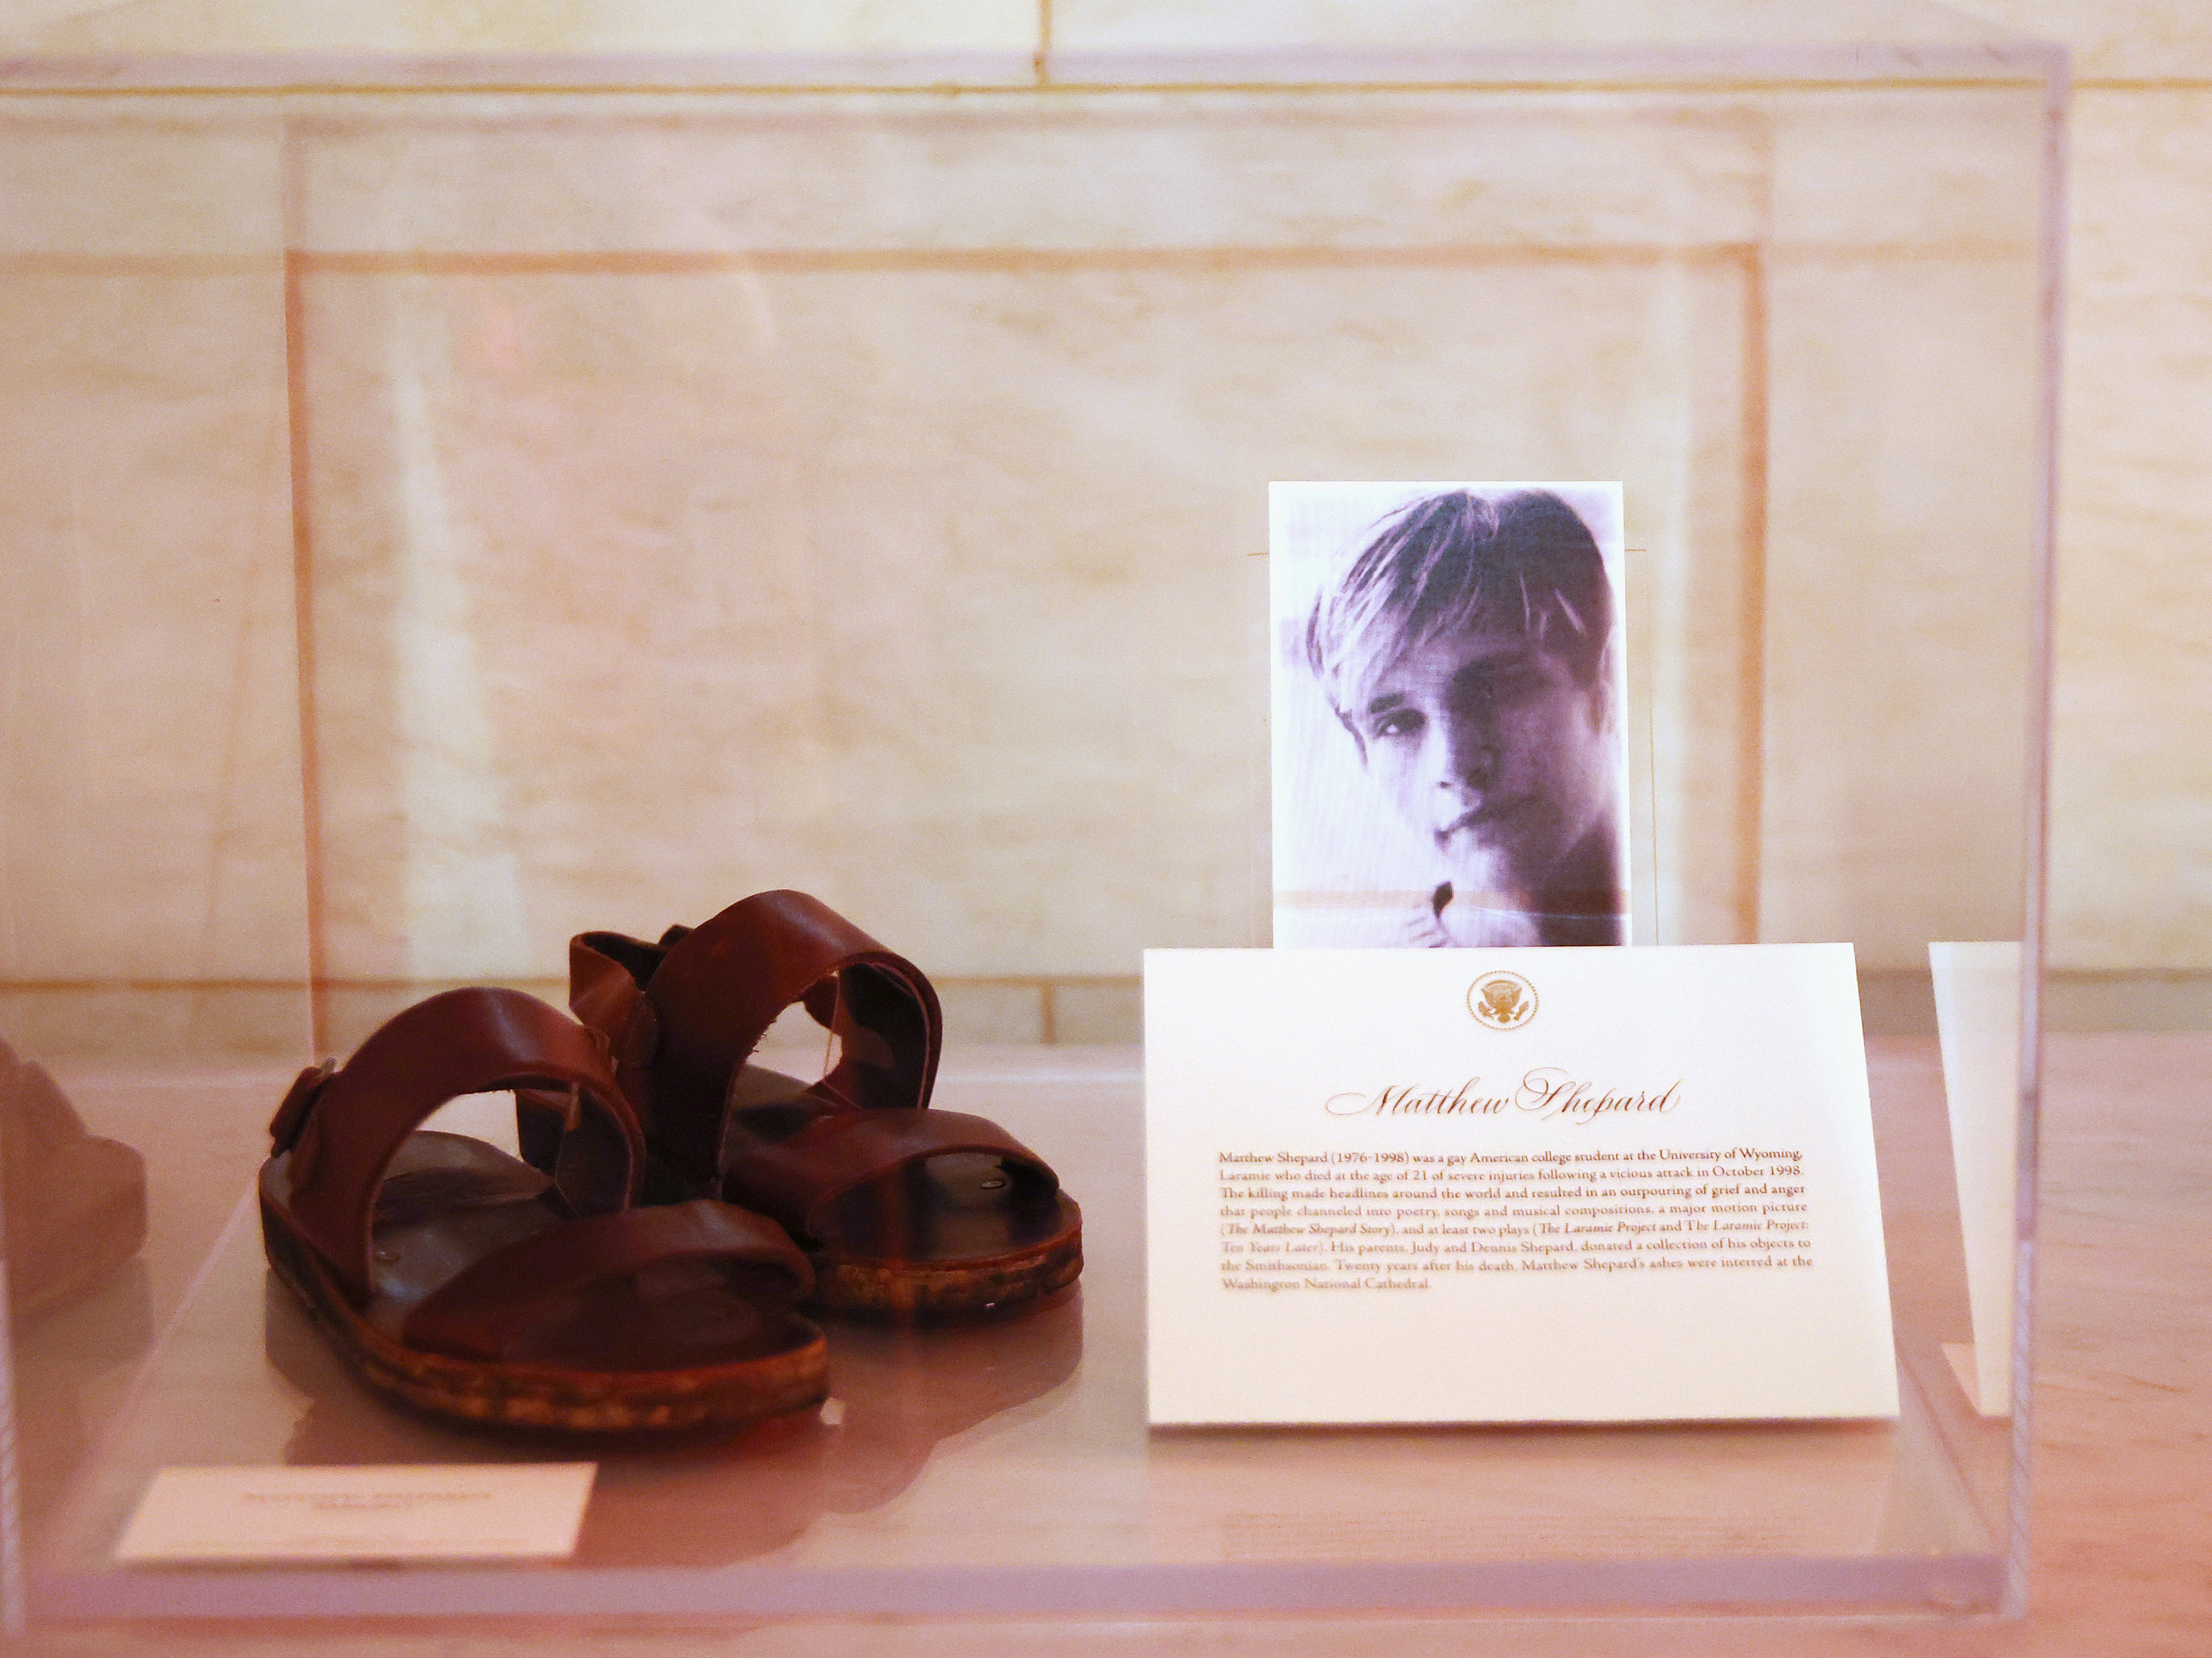 A pair of Matthew Shepard’s sandals are displayed at the White House as part of the commemoration of LGBTQ+ Pride Month on June 25, 2021 in Washington.